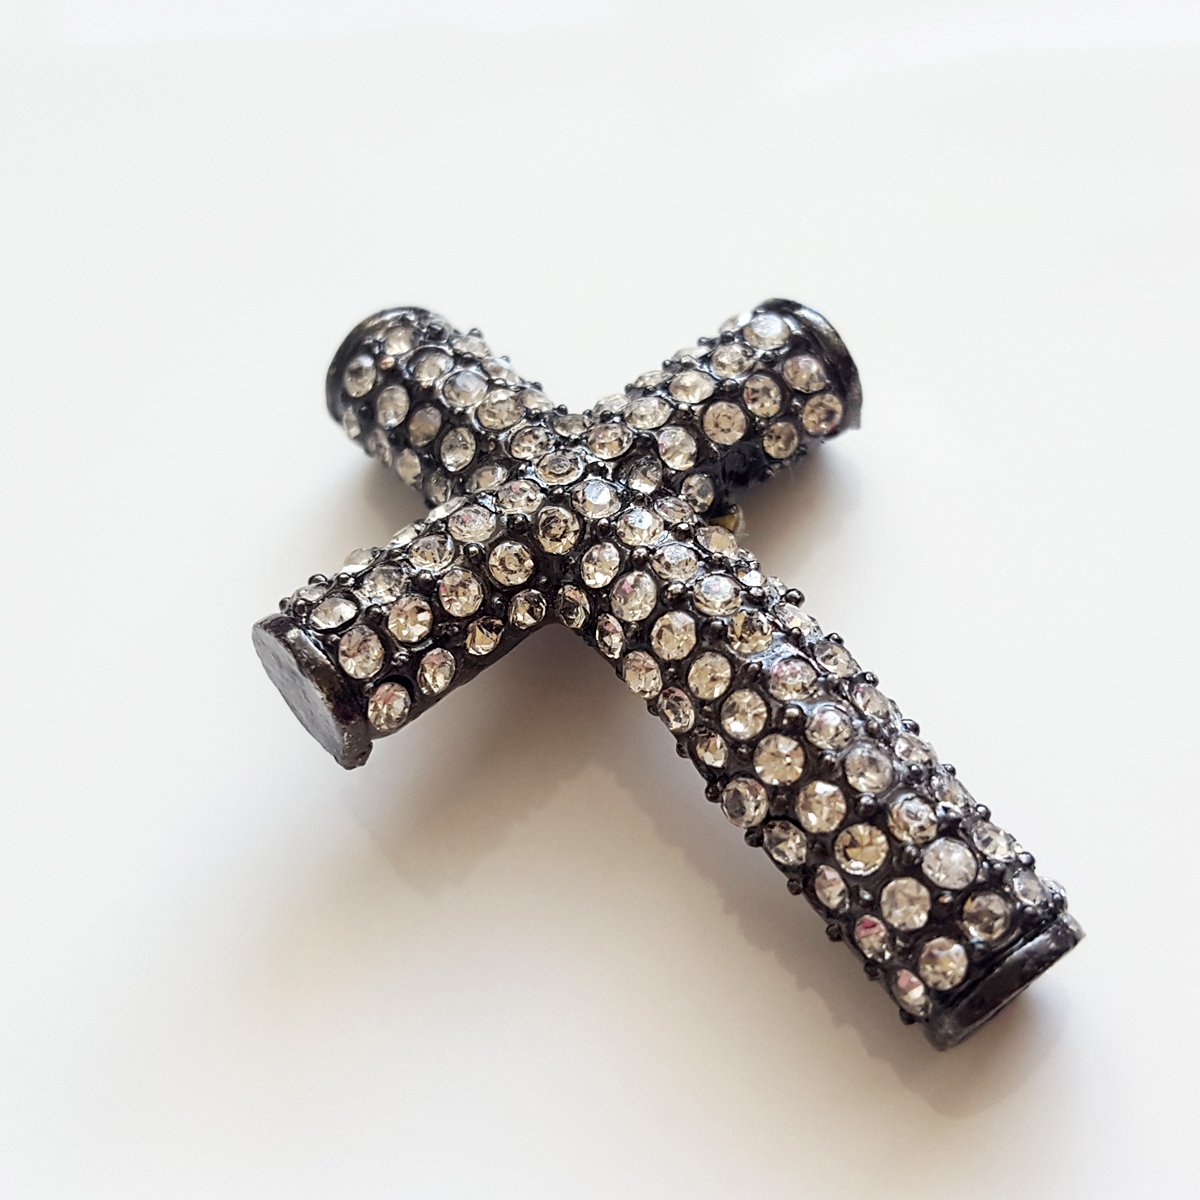 Black Base Metal Cross with white crystals | BM-002 | Jewellery Making Supply - Kalitheo Jewellery